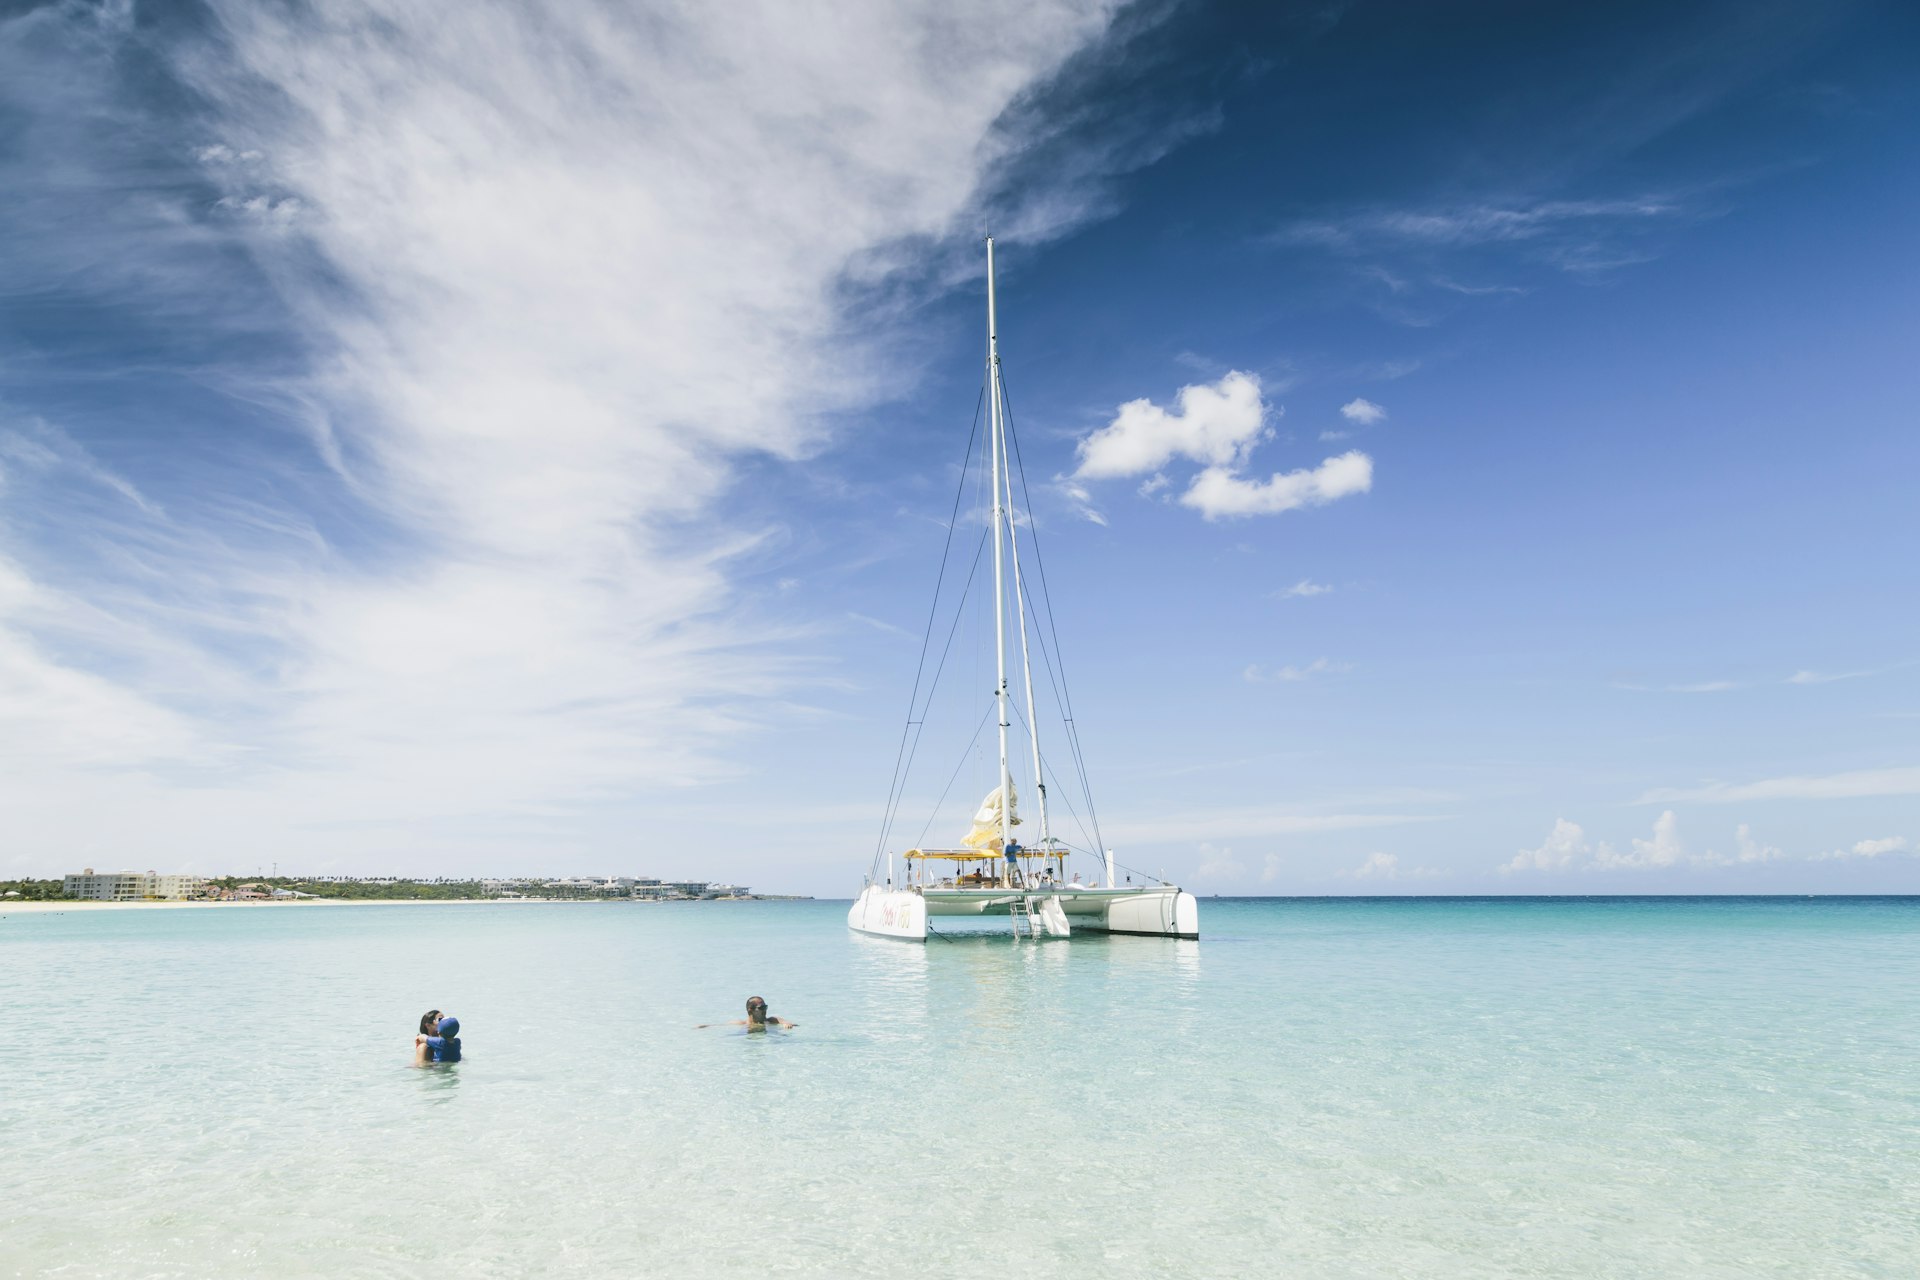 Blue sea water and white sailboat in the background, view from the blue waters of the Caribbean 